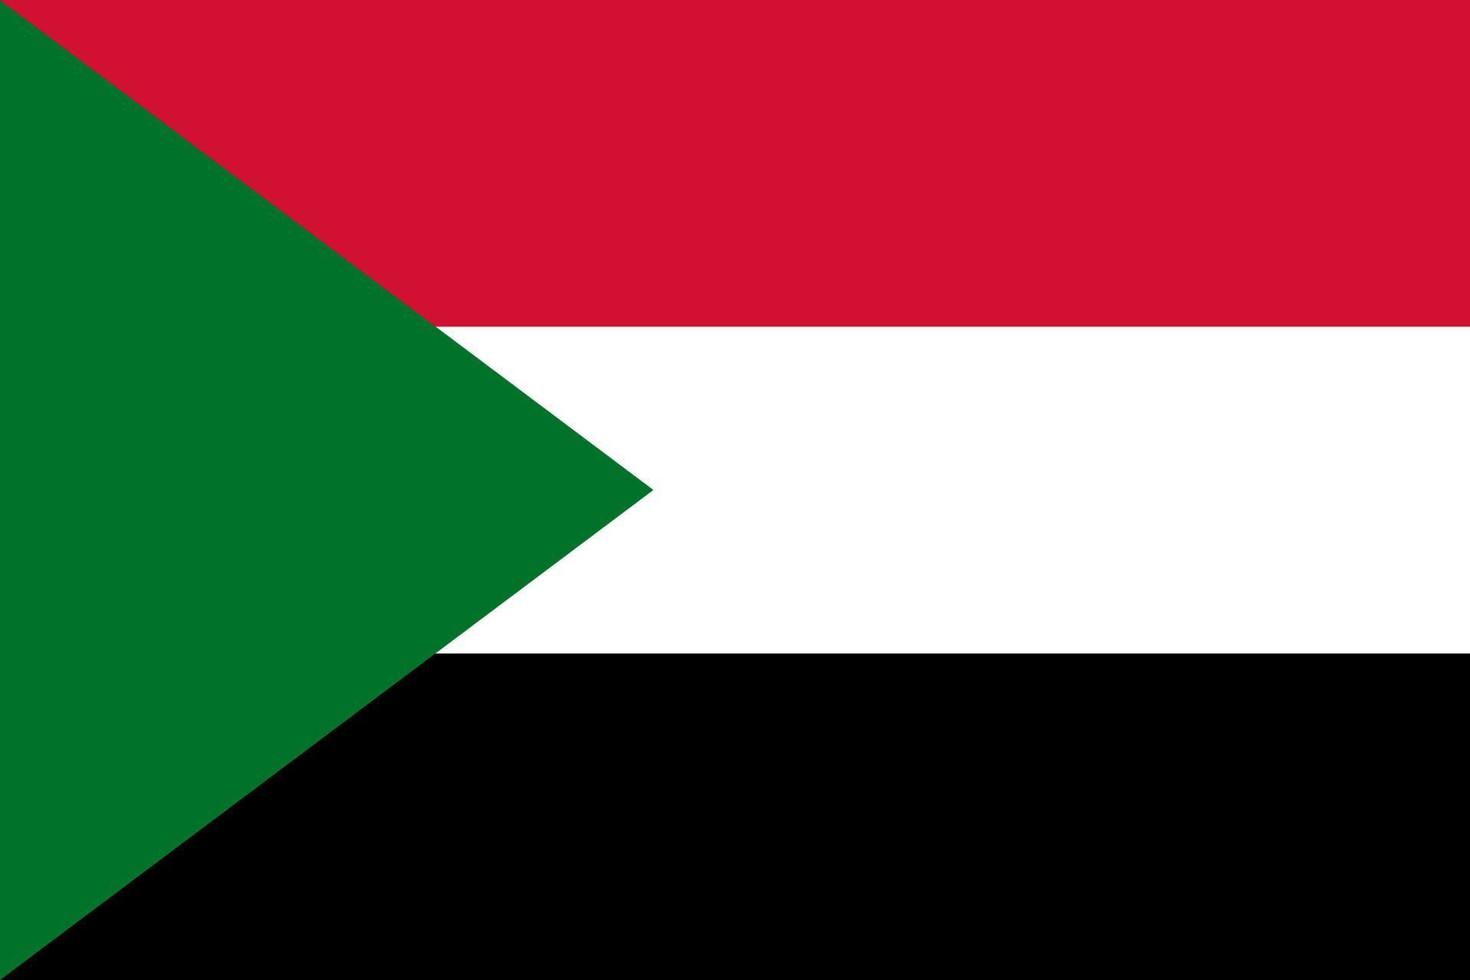 Sudan flag. Illustration of Sudan flag vector in flat style for web and digital,Republic of Sudan national fabric flag, textile background. Symbol of international world African country.